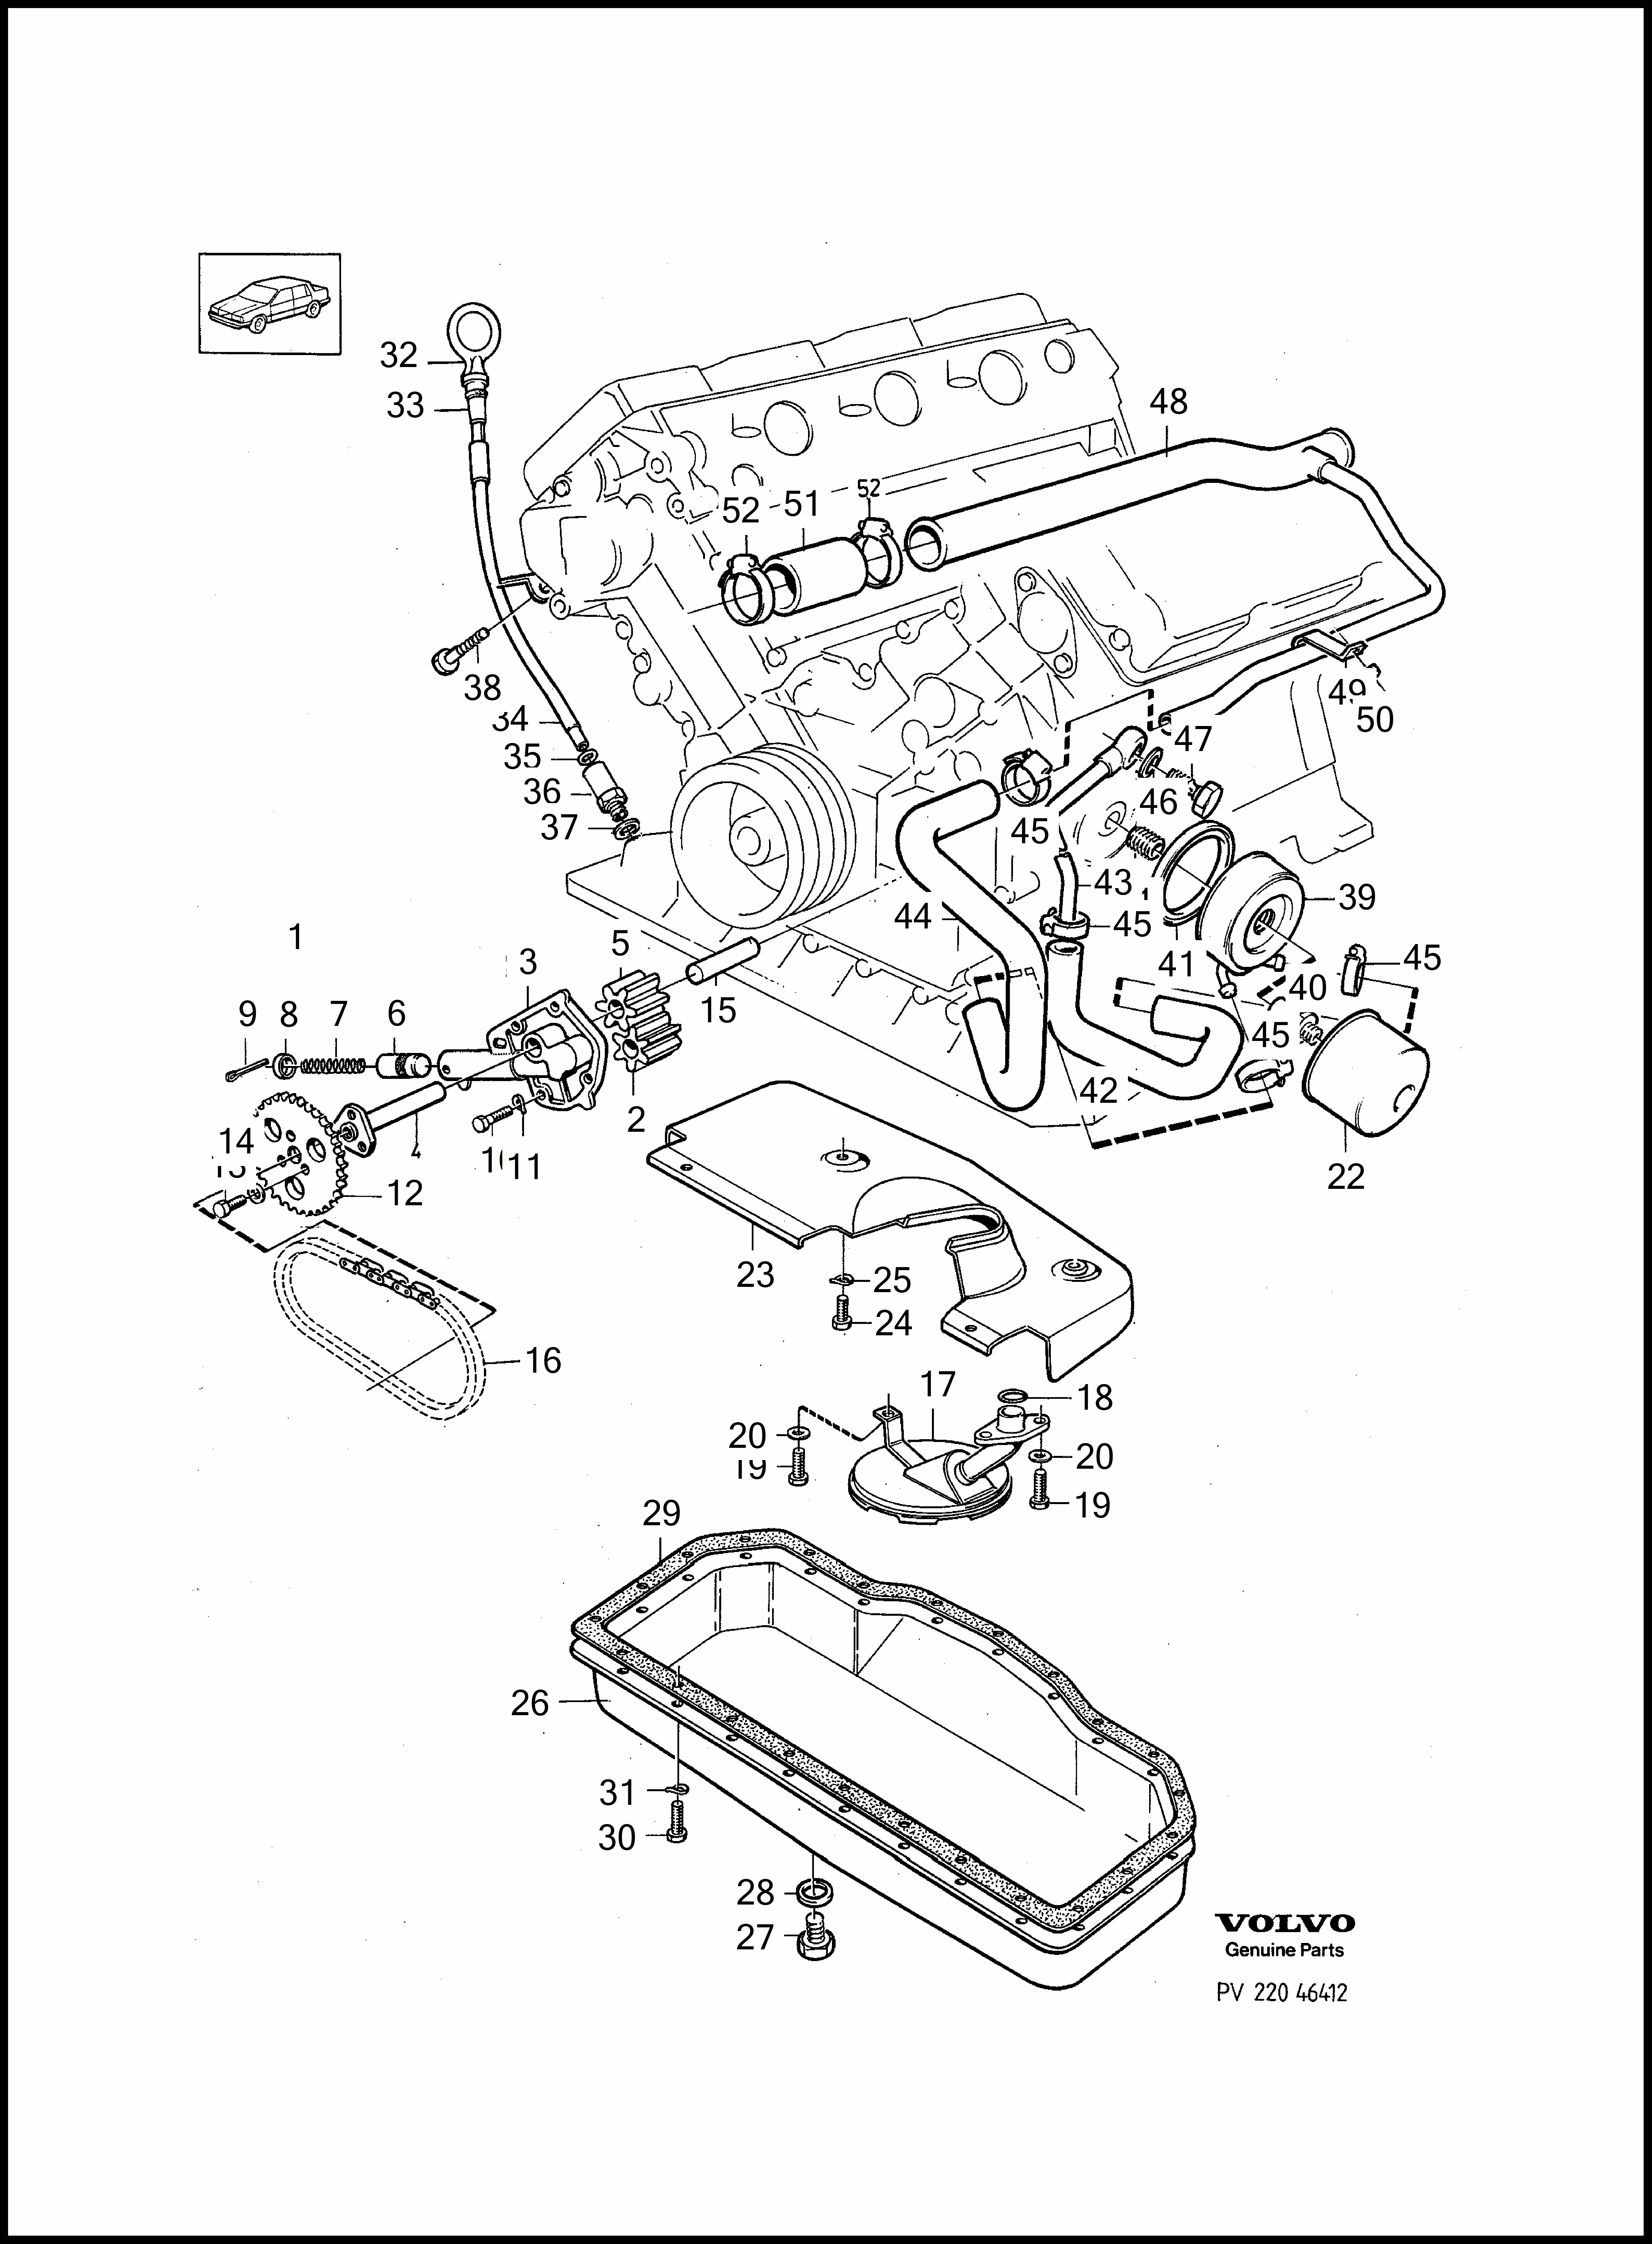 Lubricating system for Volvo 760 760